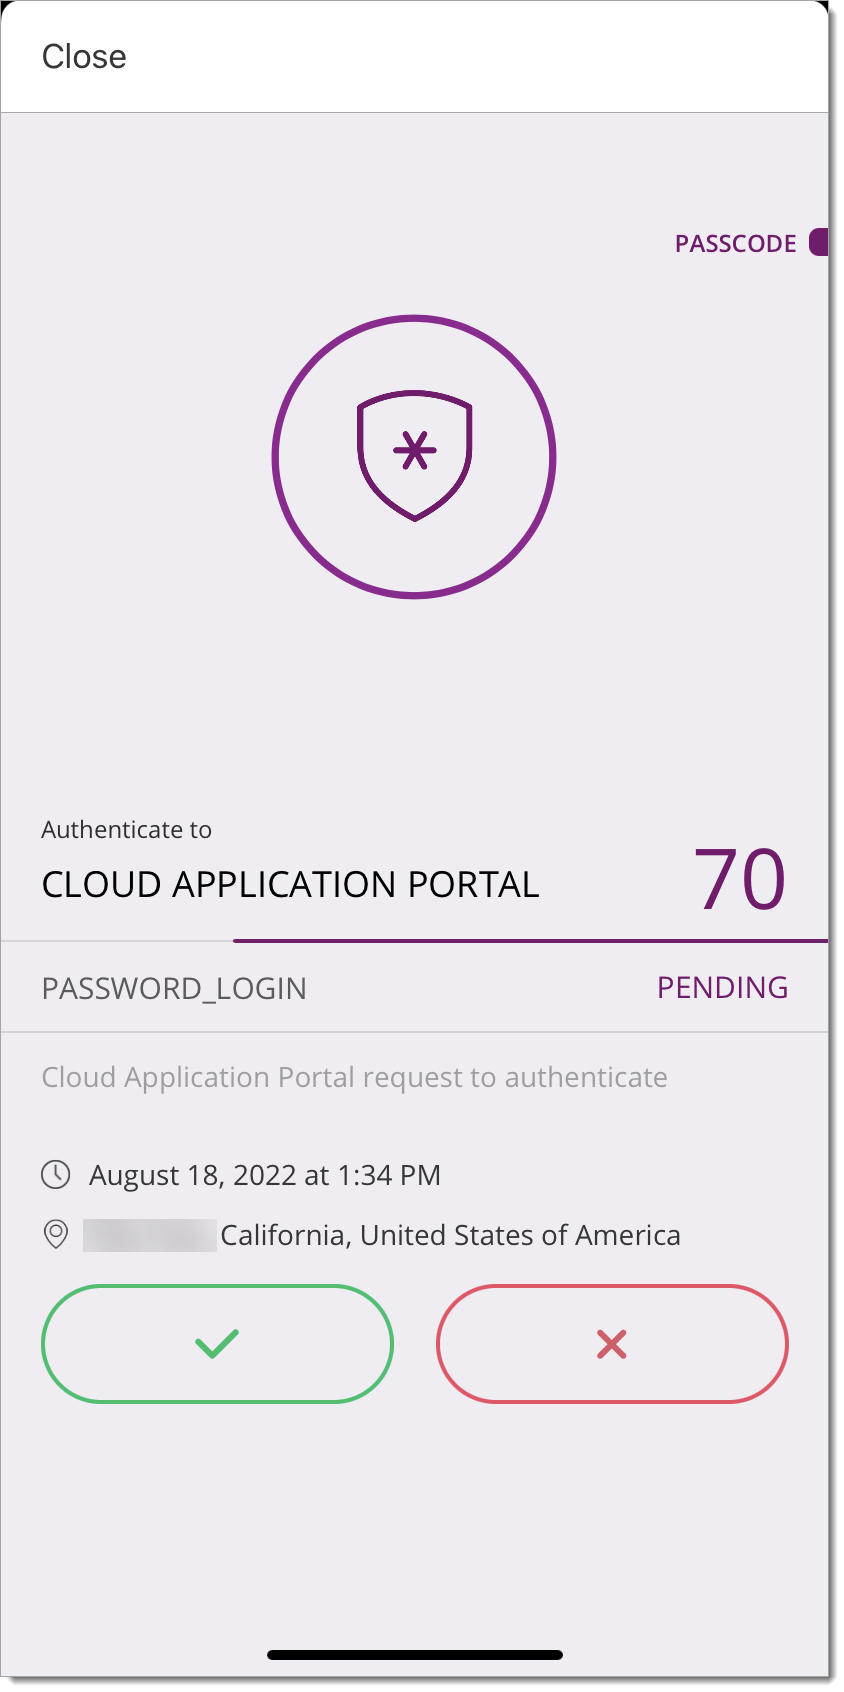 Accept or deny authentication request in app